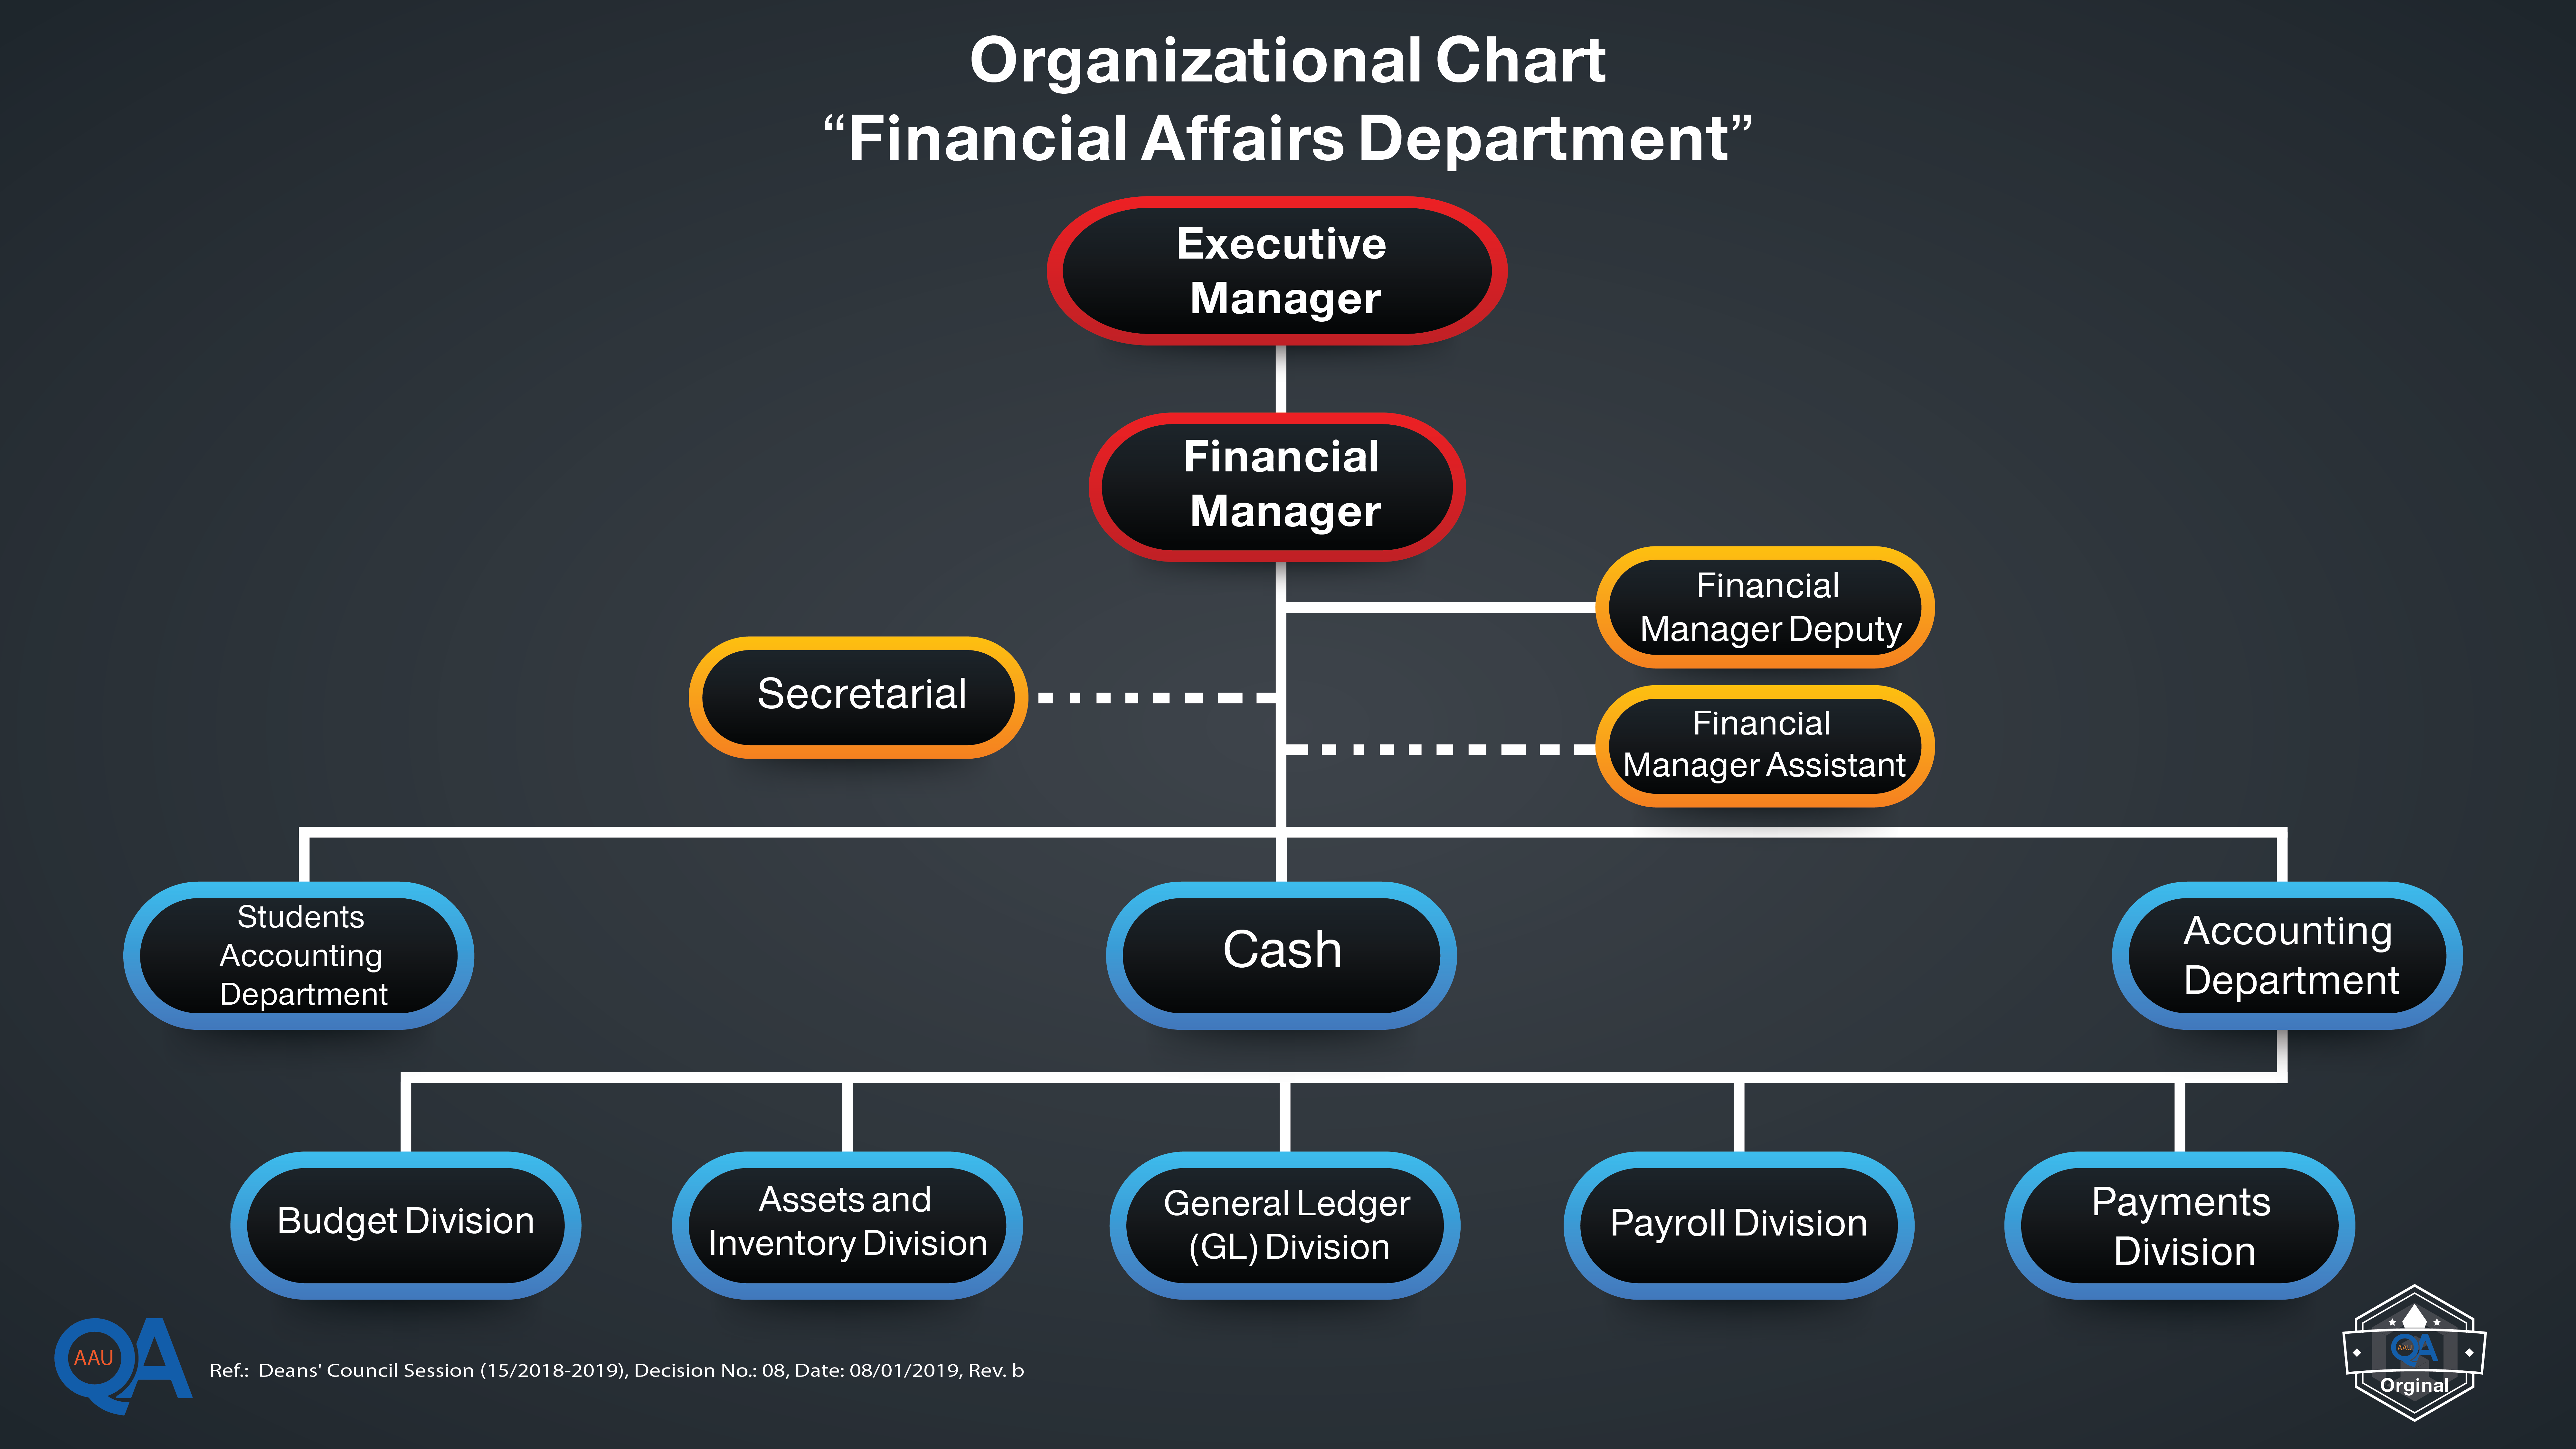 Organizational Chart for the Financial Affairs Department-01